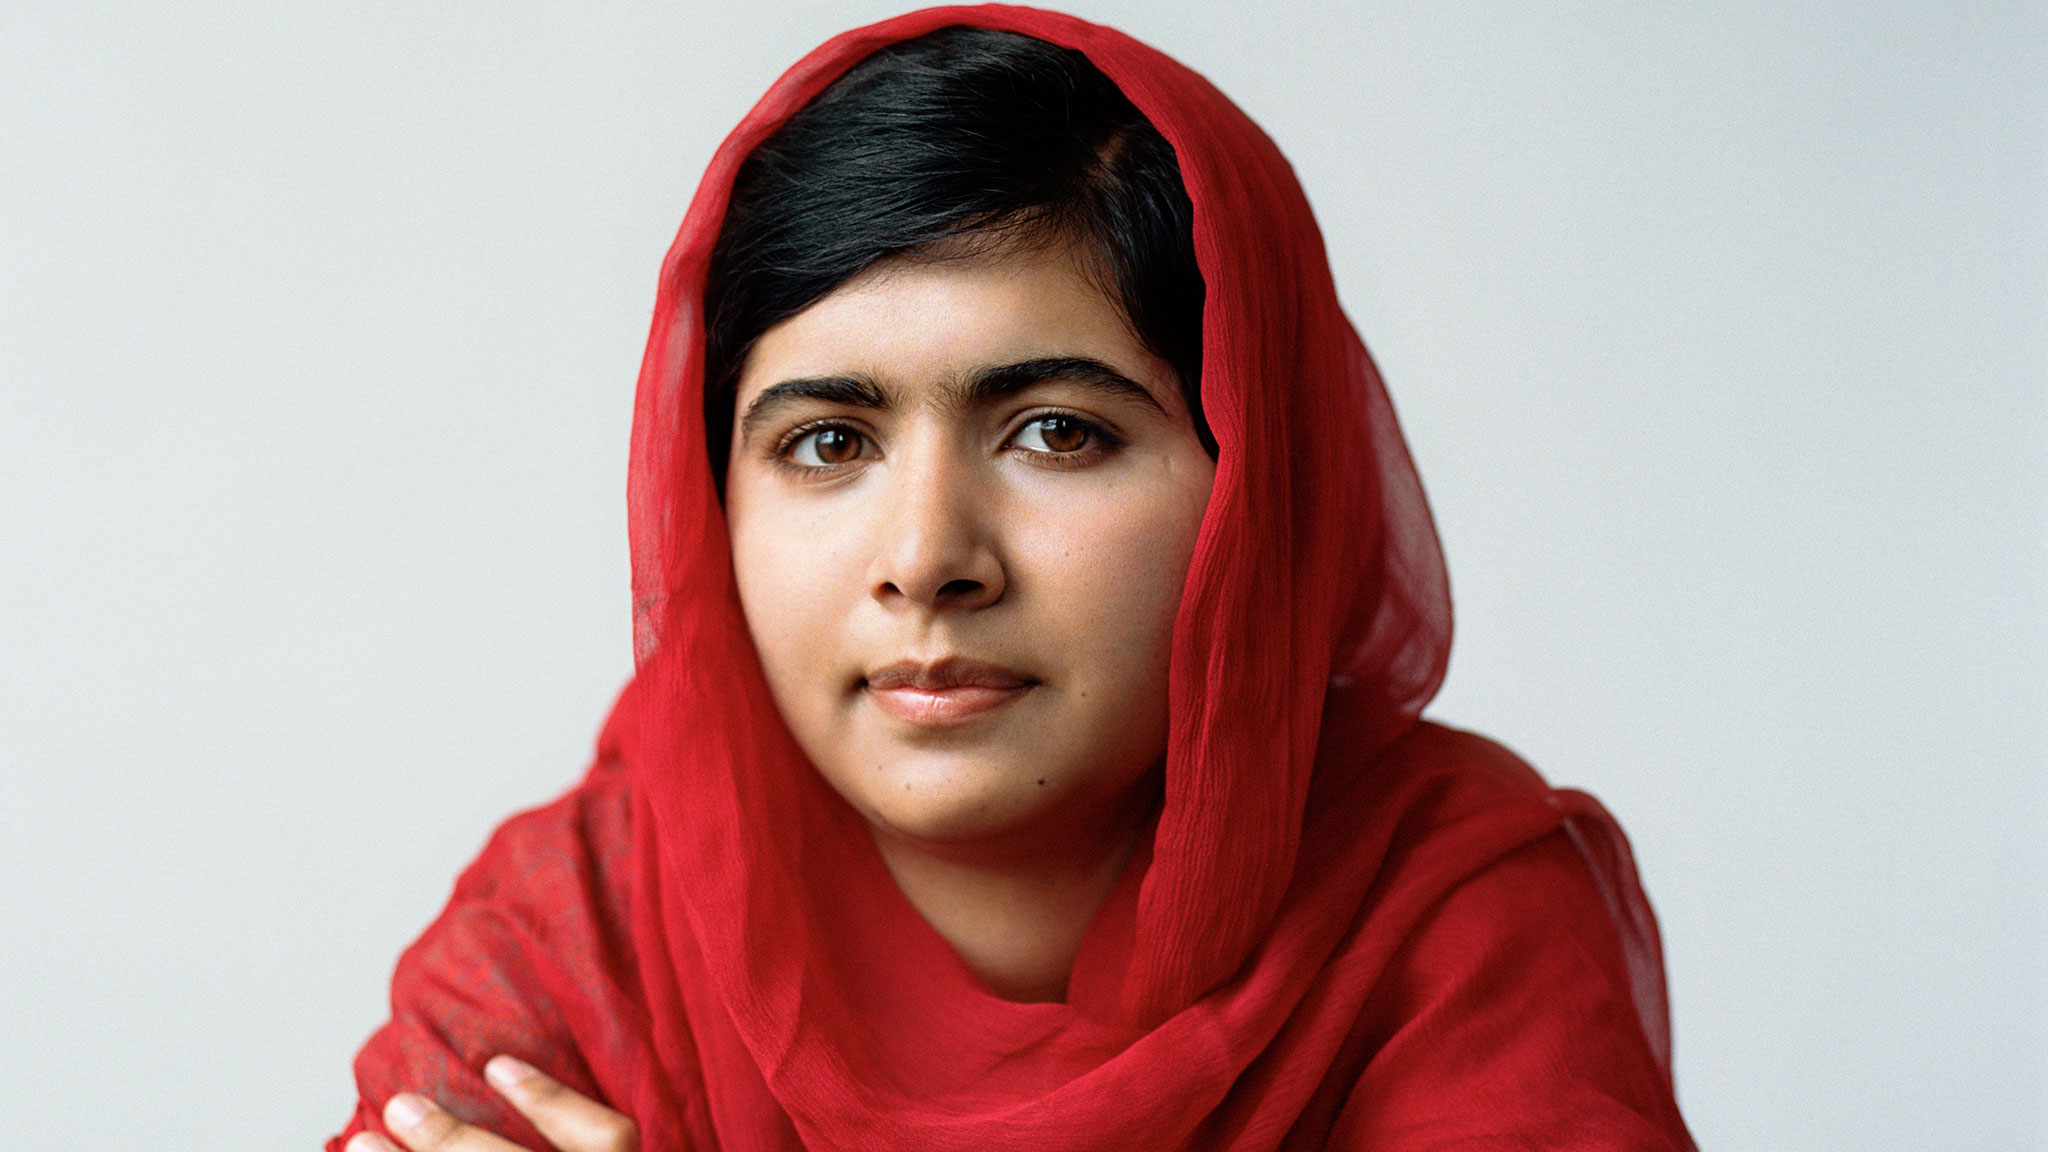 Pakistan's Malala 'excited' after winning place at Oxford University